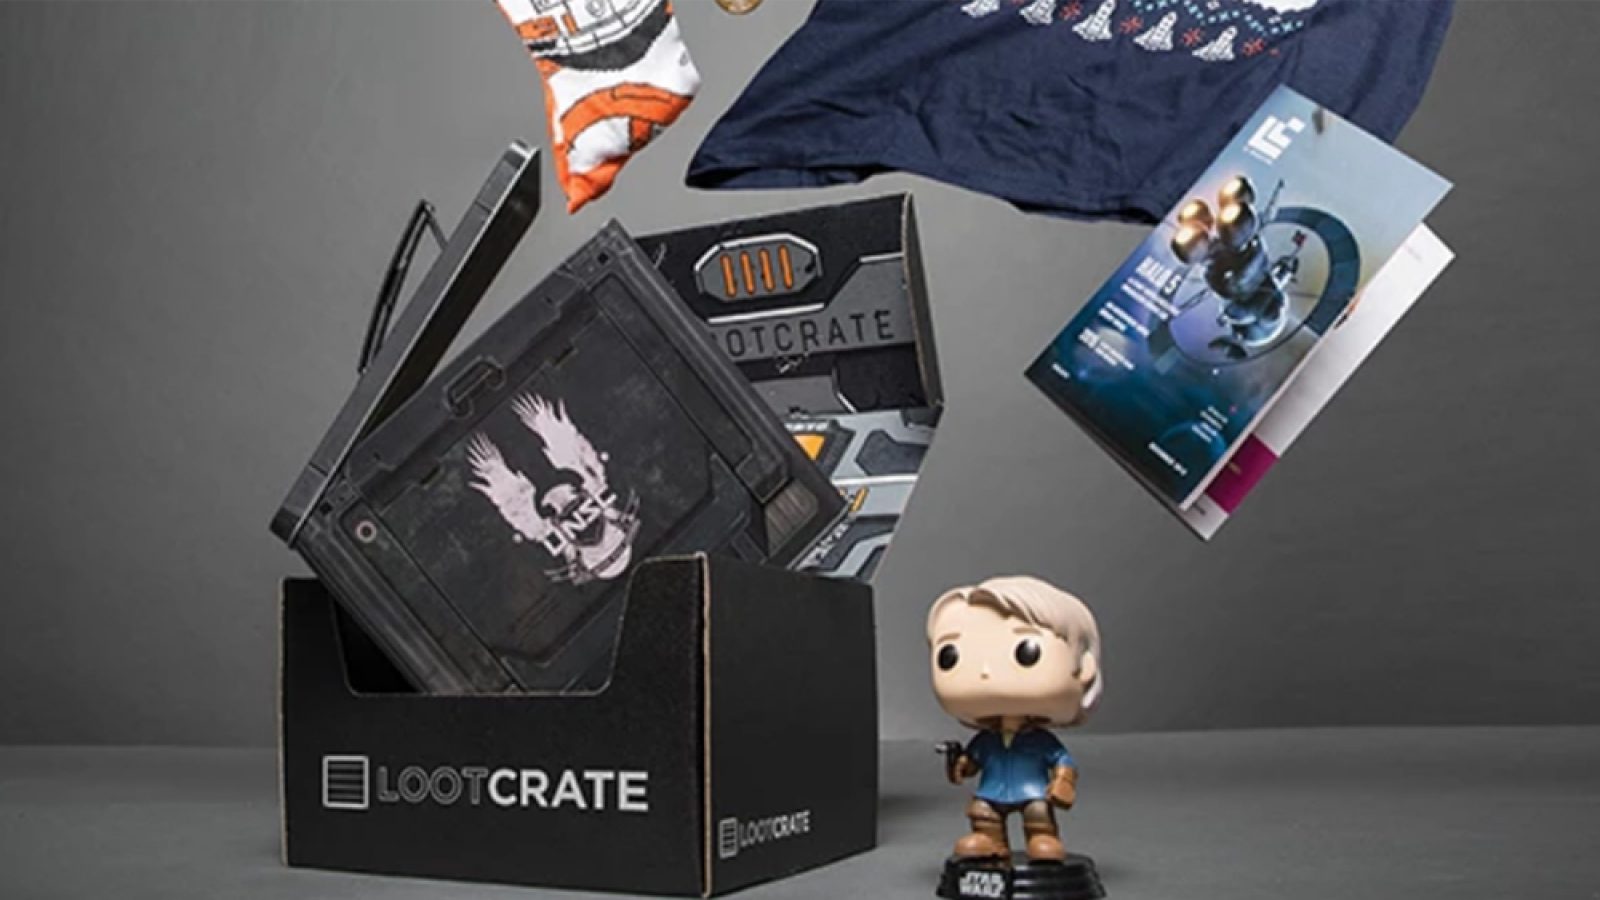 Loot Crate Files For Bankruptcy After Layoffs - IGN